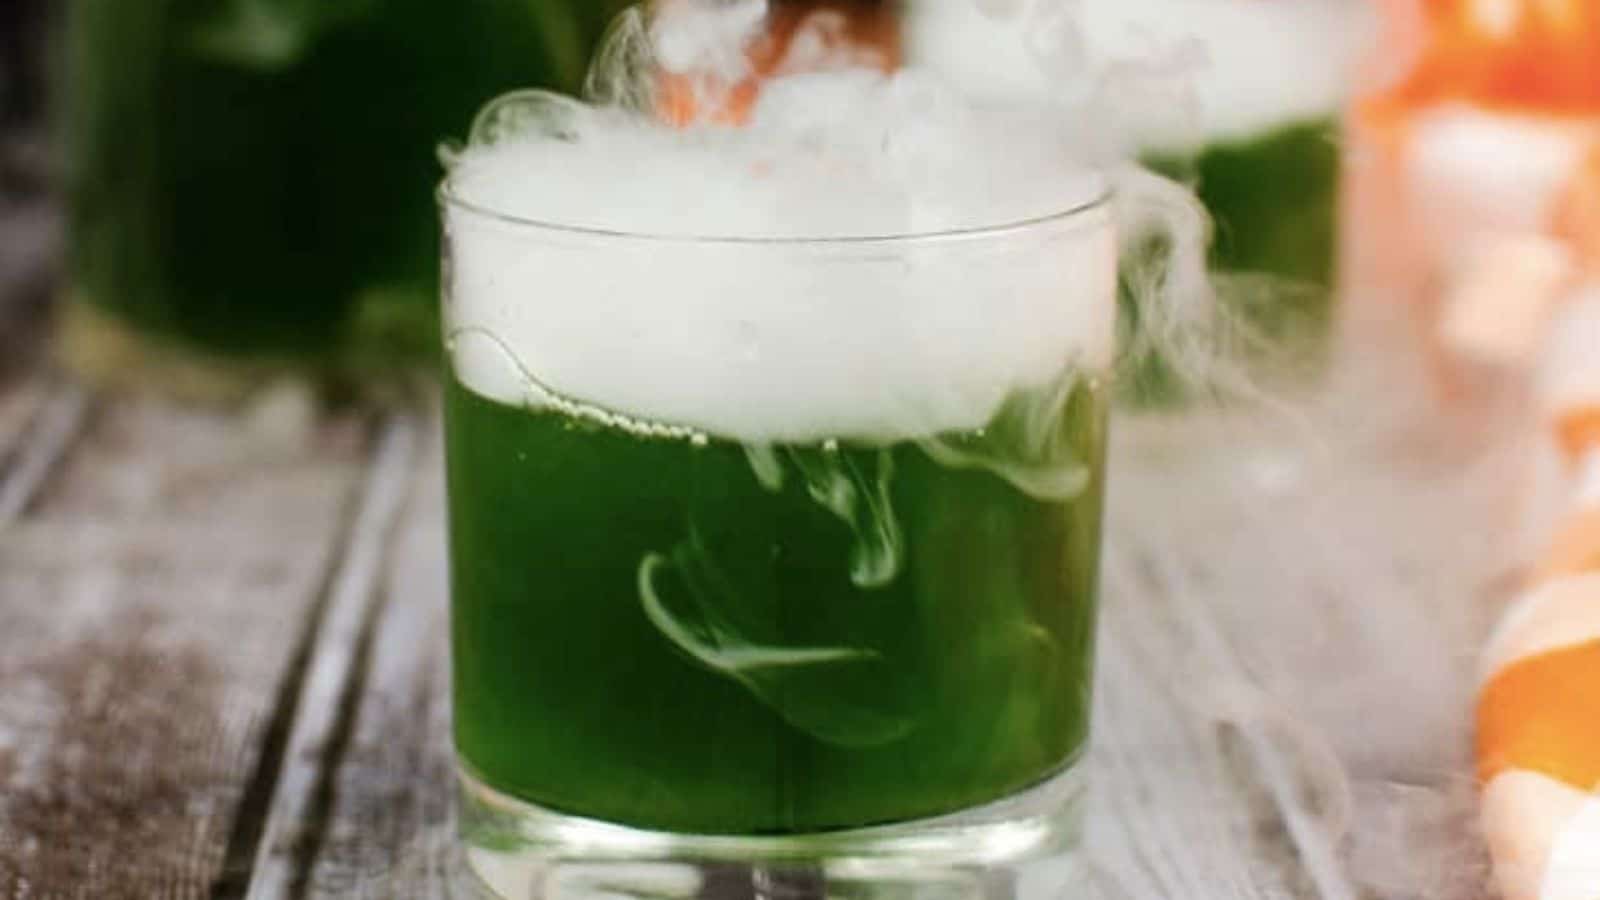 Green witches brew cocktail.